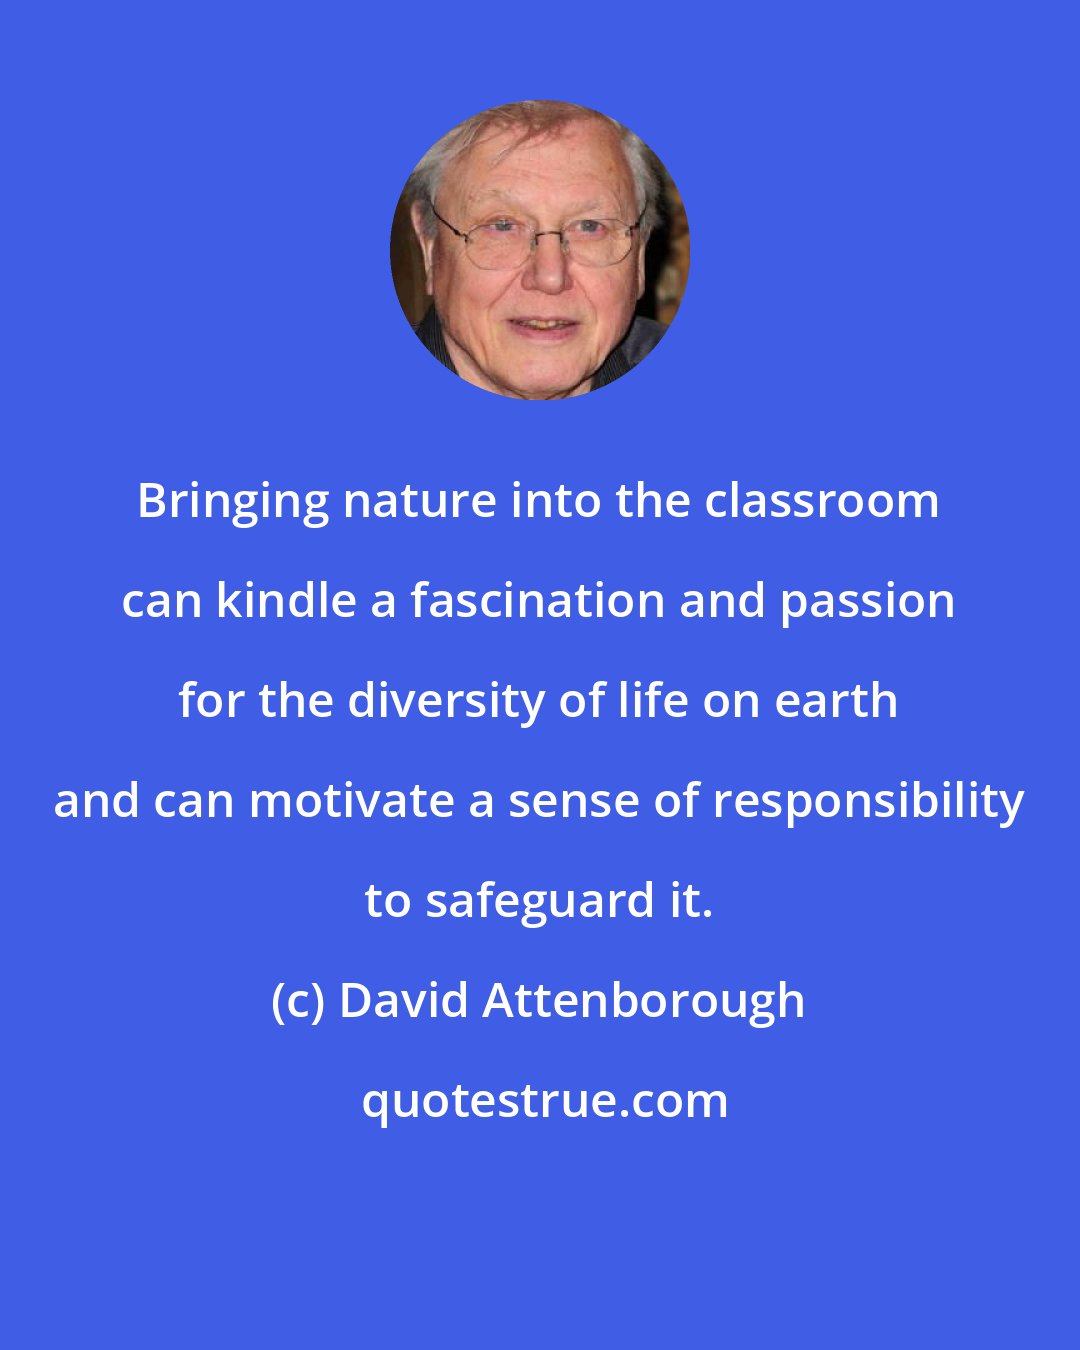 David Attenborough: Bringing nature into the classroom can kindle a fascination and passion for the diversity of life on earth and can motivate a sense of responsibility to safeguard it.